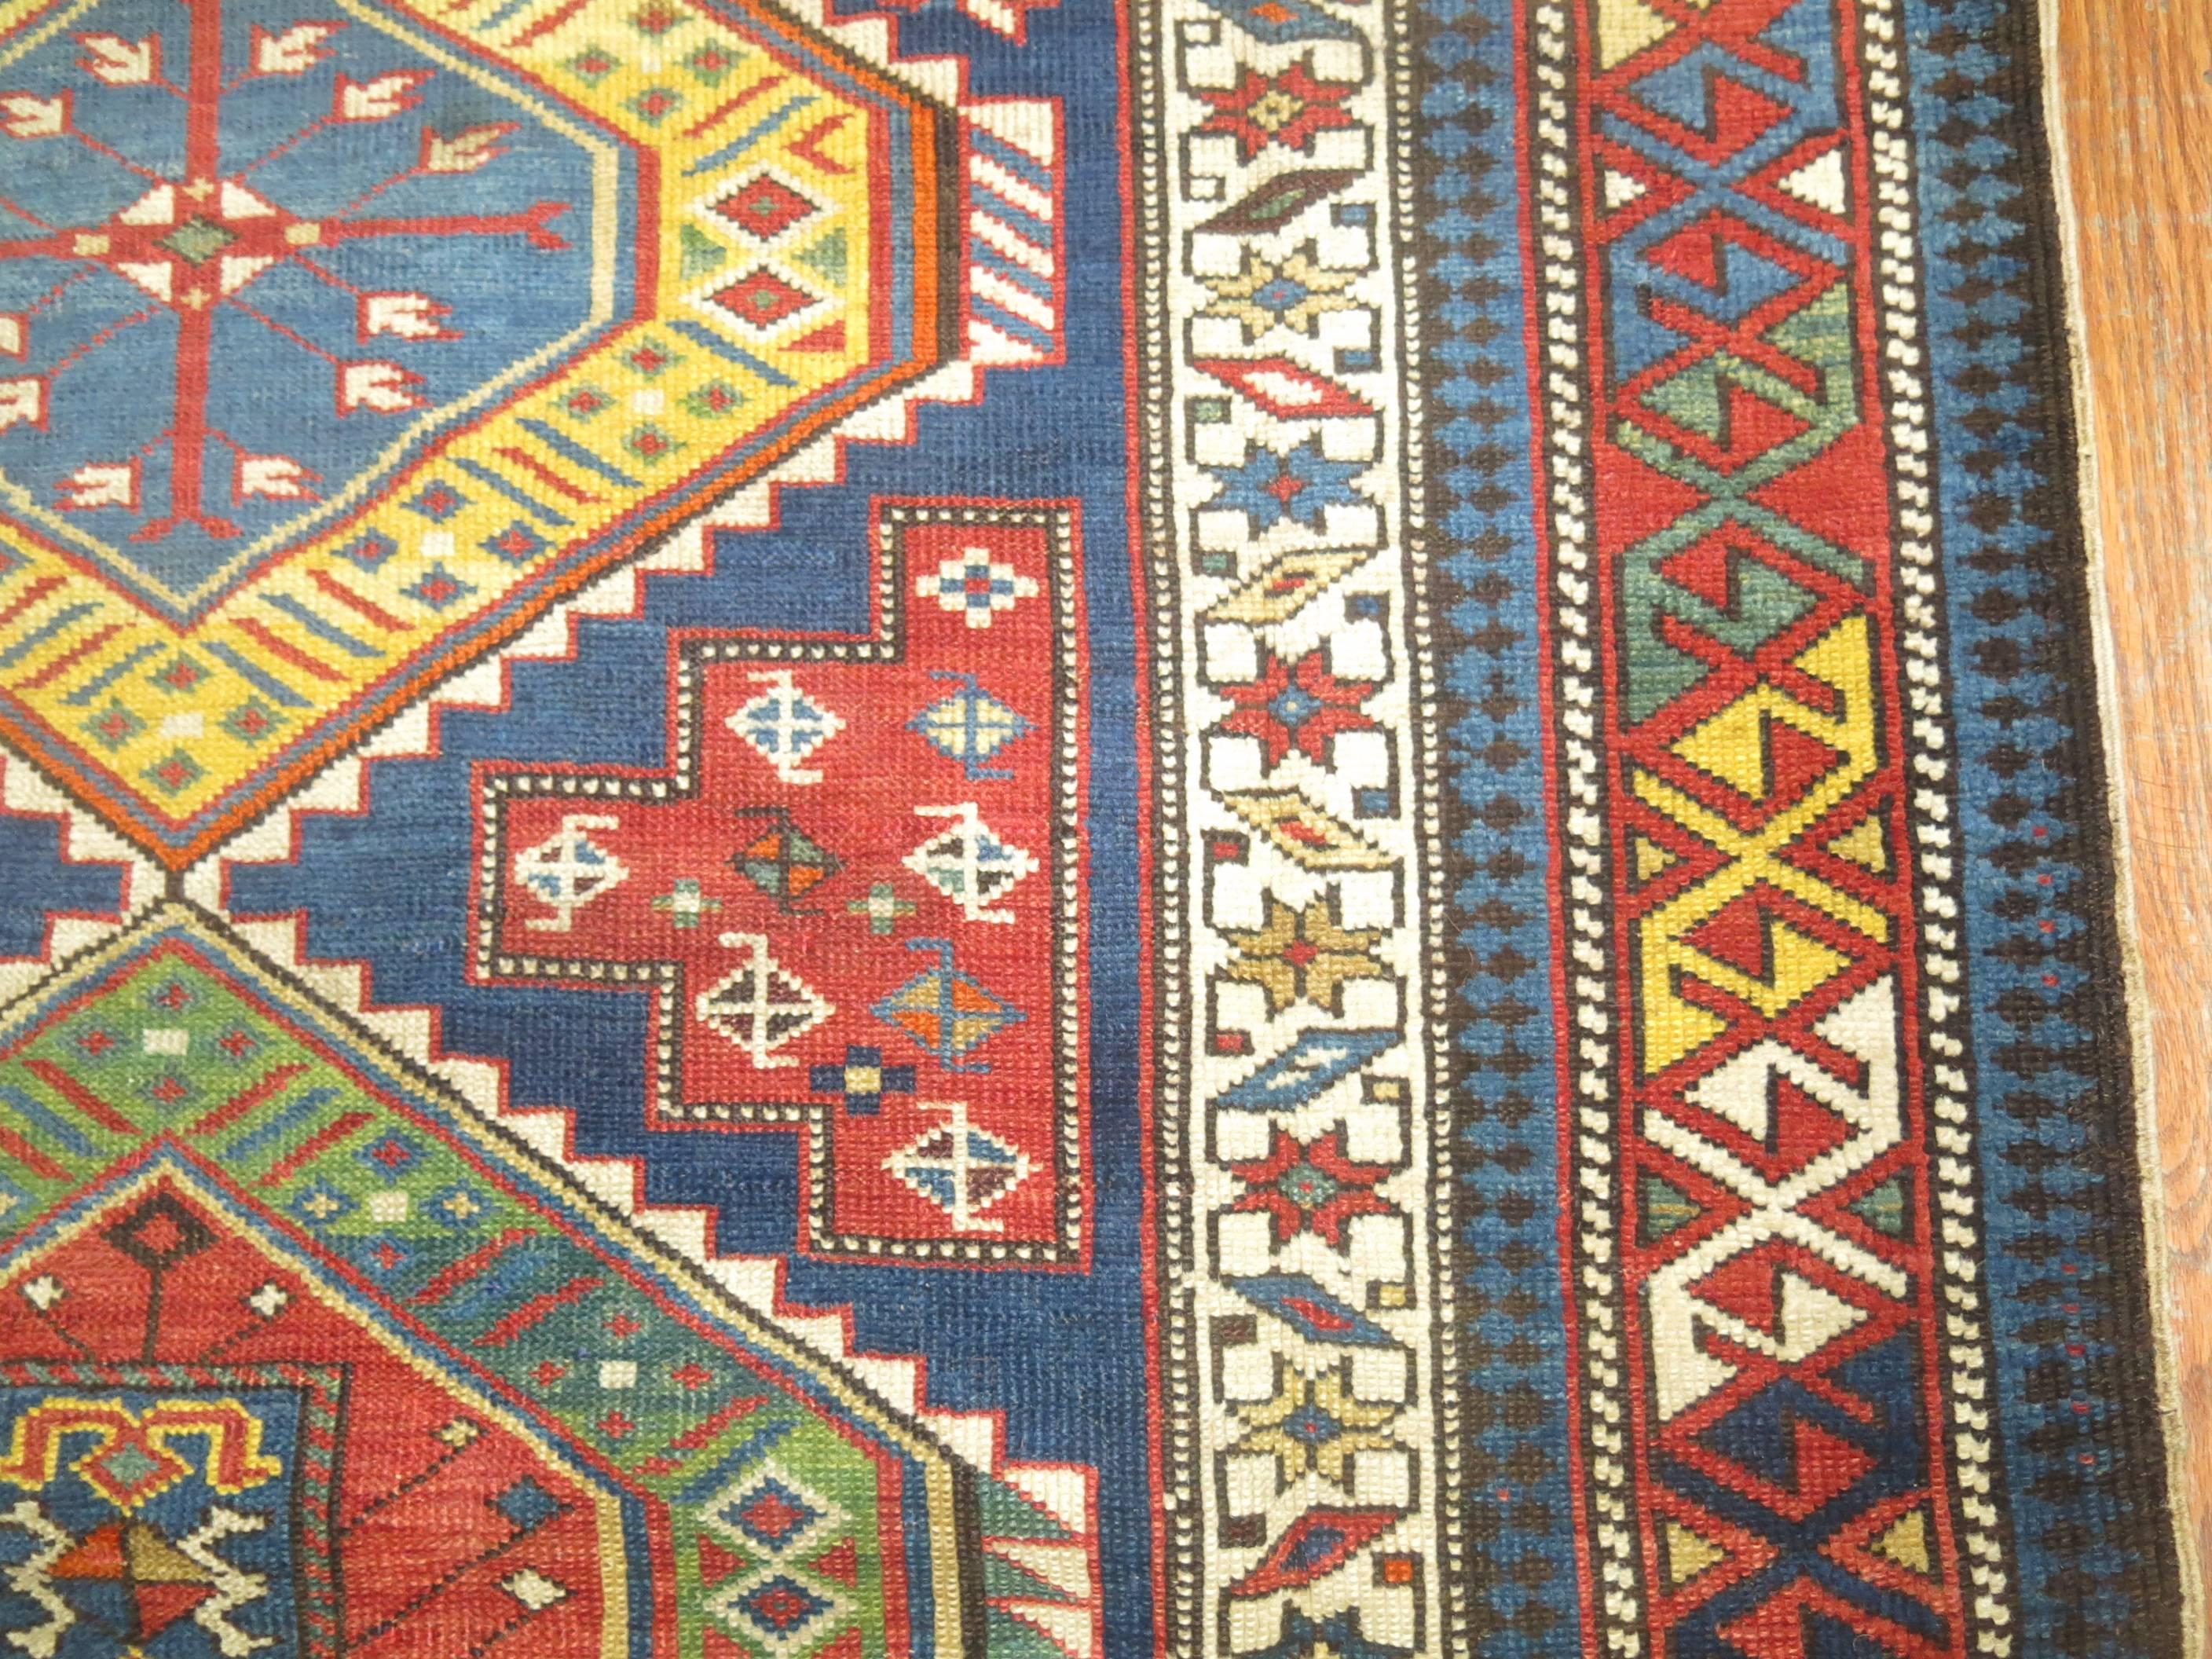 Spectacular early 20th century antique decorative and collectible shirvan rug.

As a result of European demand, Shirvan Caucasian rug designs in the late 19th century and early 20th century initially became more intricate, with increasingly fine